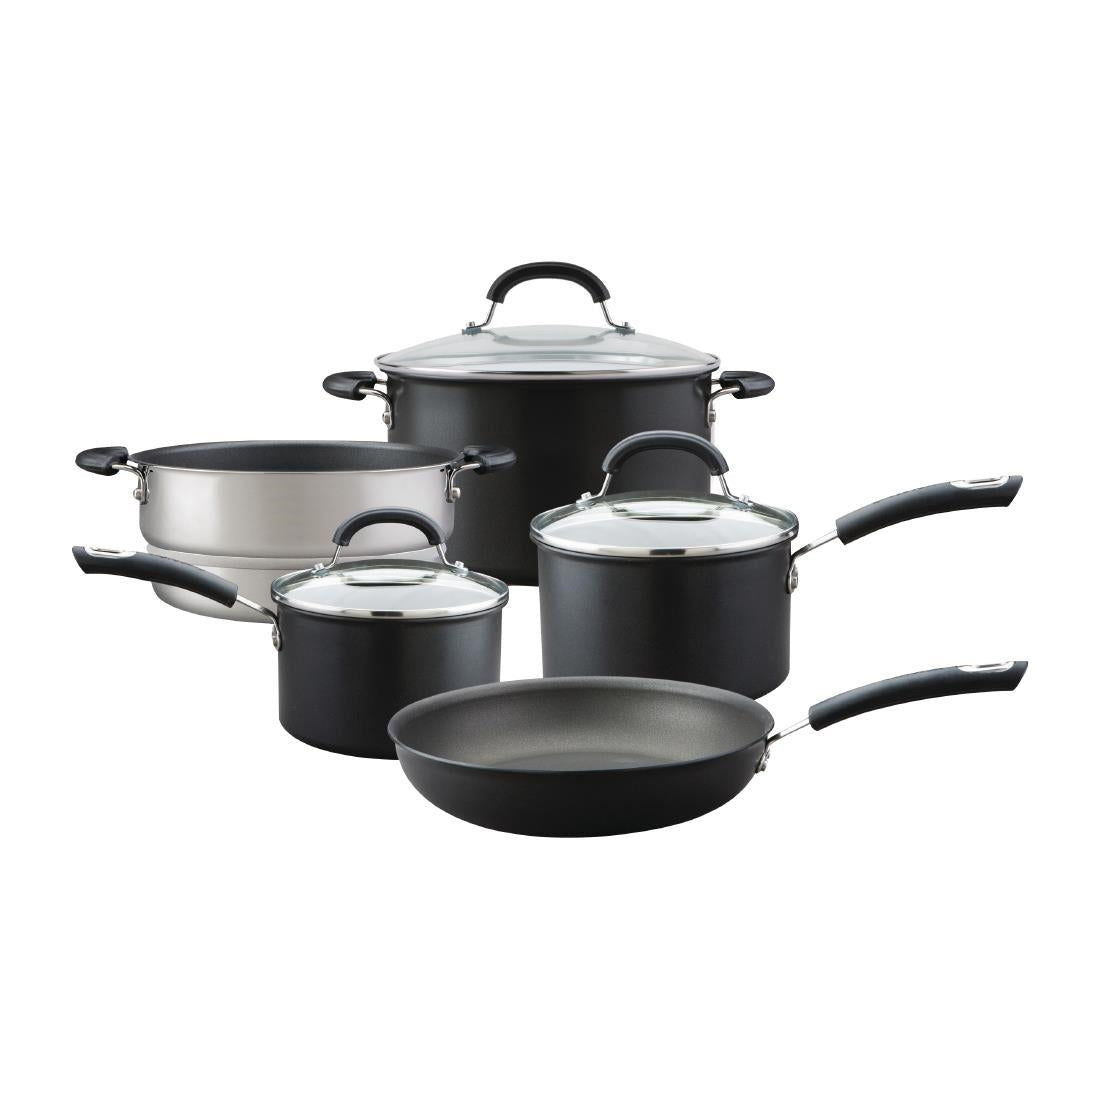 FT628 Circulon Total Hard Anodized 5 Piece Pan Set JD Catering Equipment Solutions Ltd